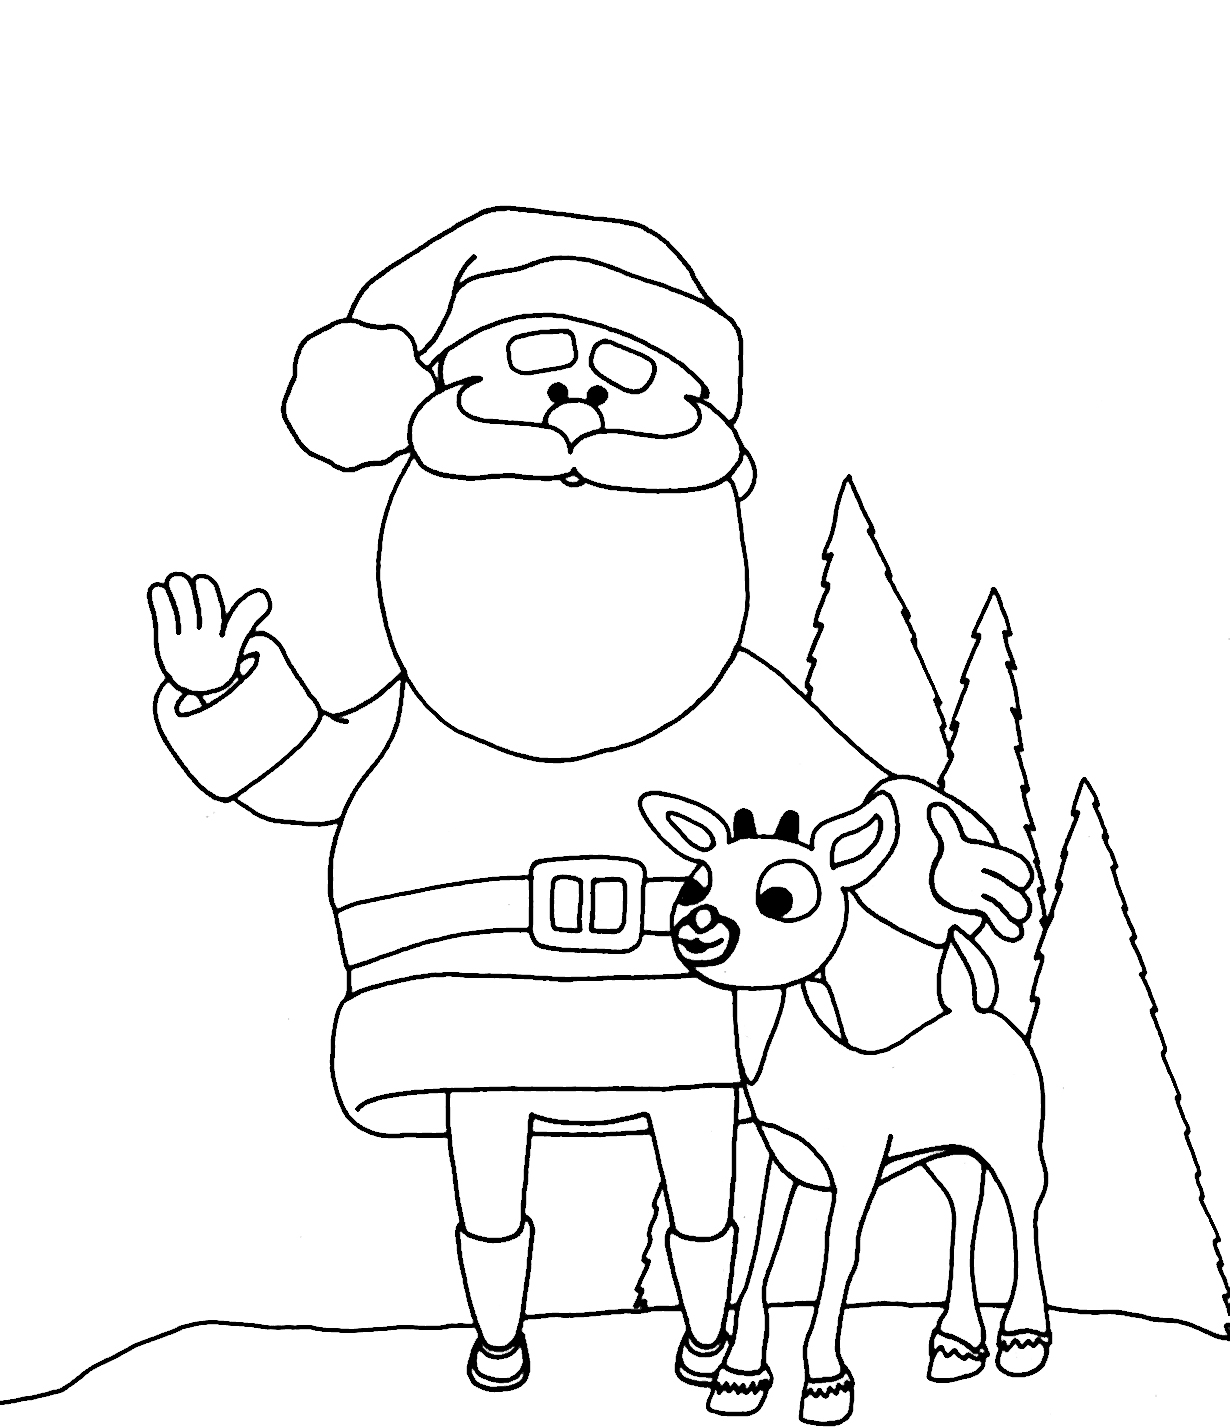 626 Simple Santa Coloring Pages with Animal character